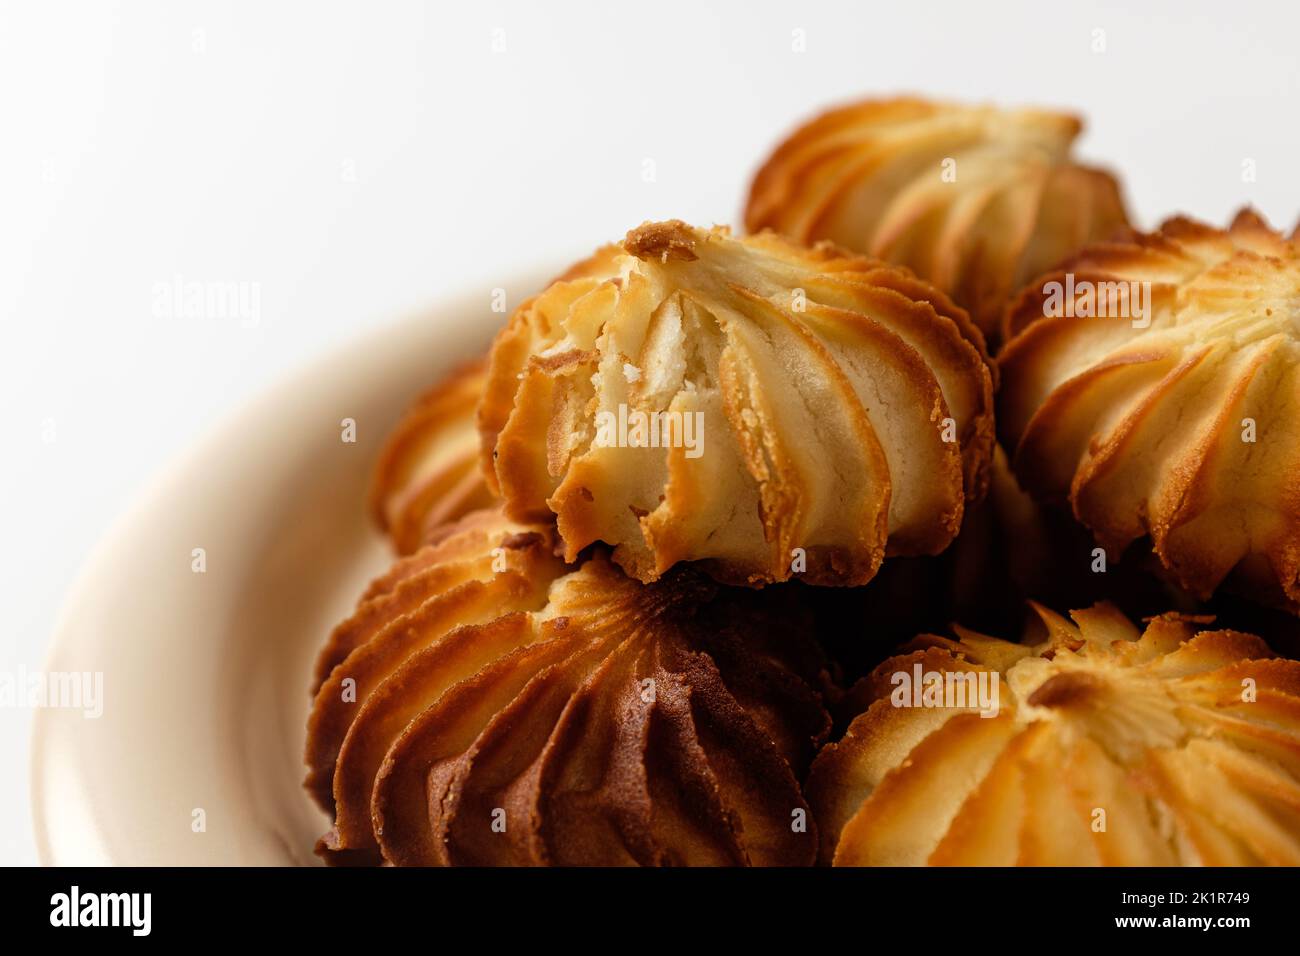 Japanese food culture. Dessert made with sweet filling. sweet and soft dessert Stock Photo